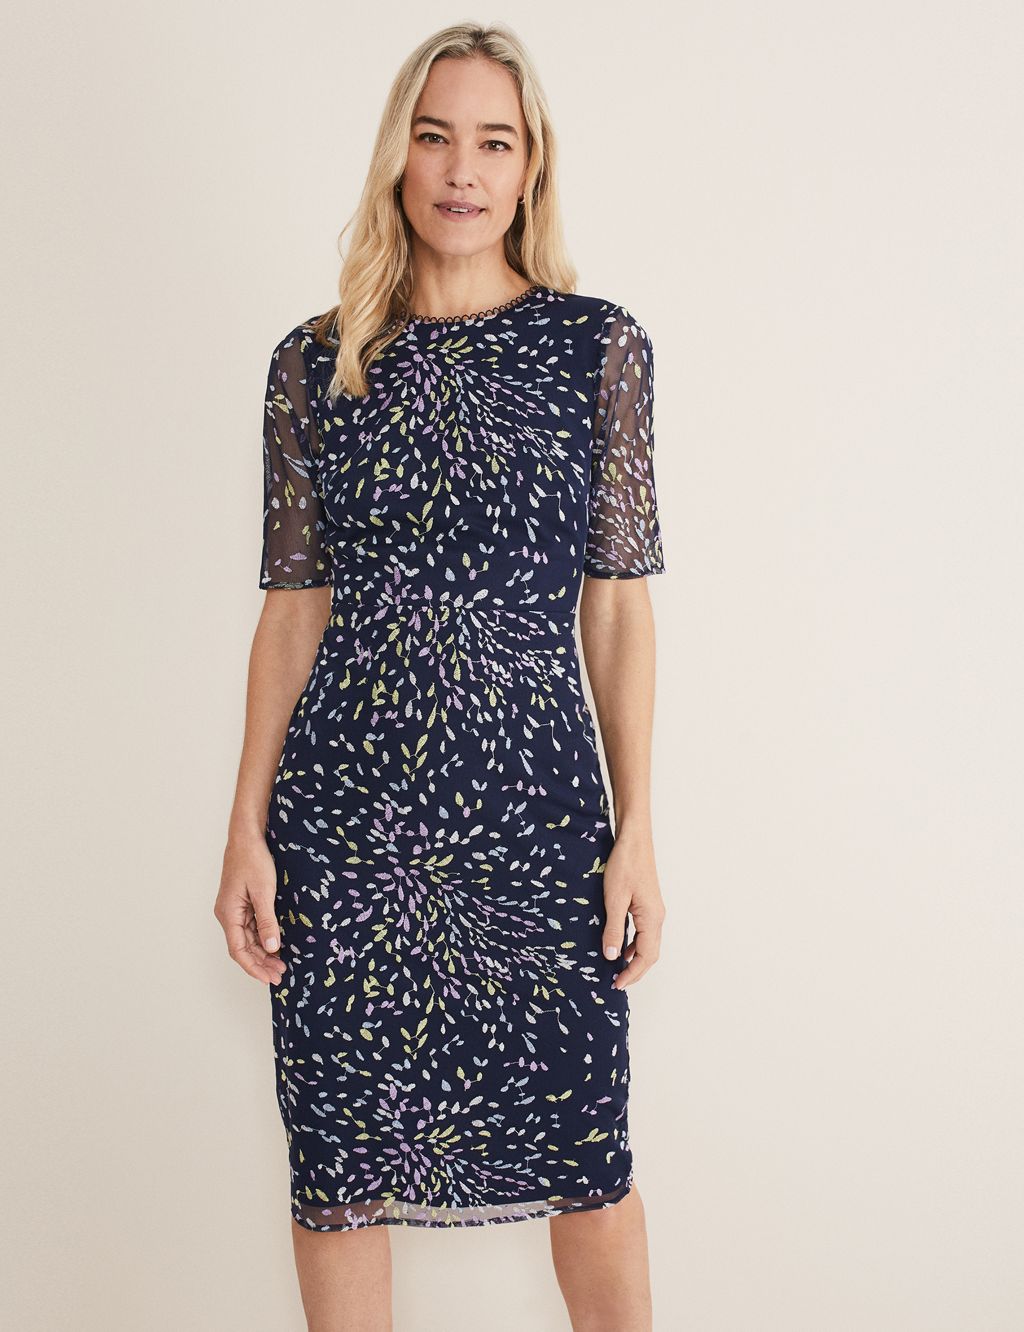 Embroidered Round Neck Midi Tailored Dress image 1